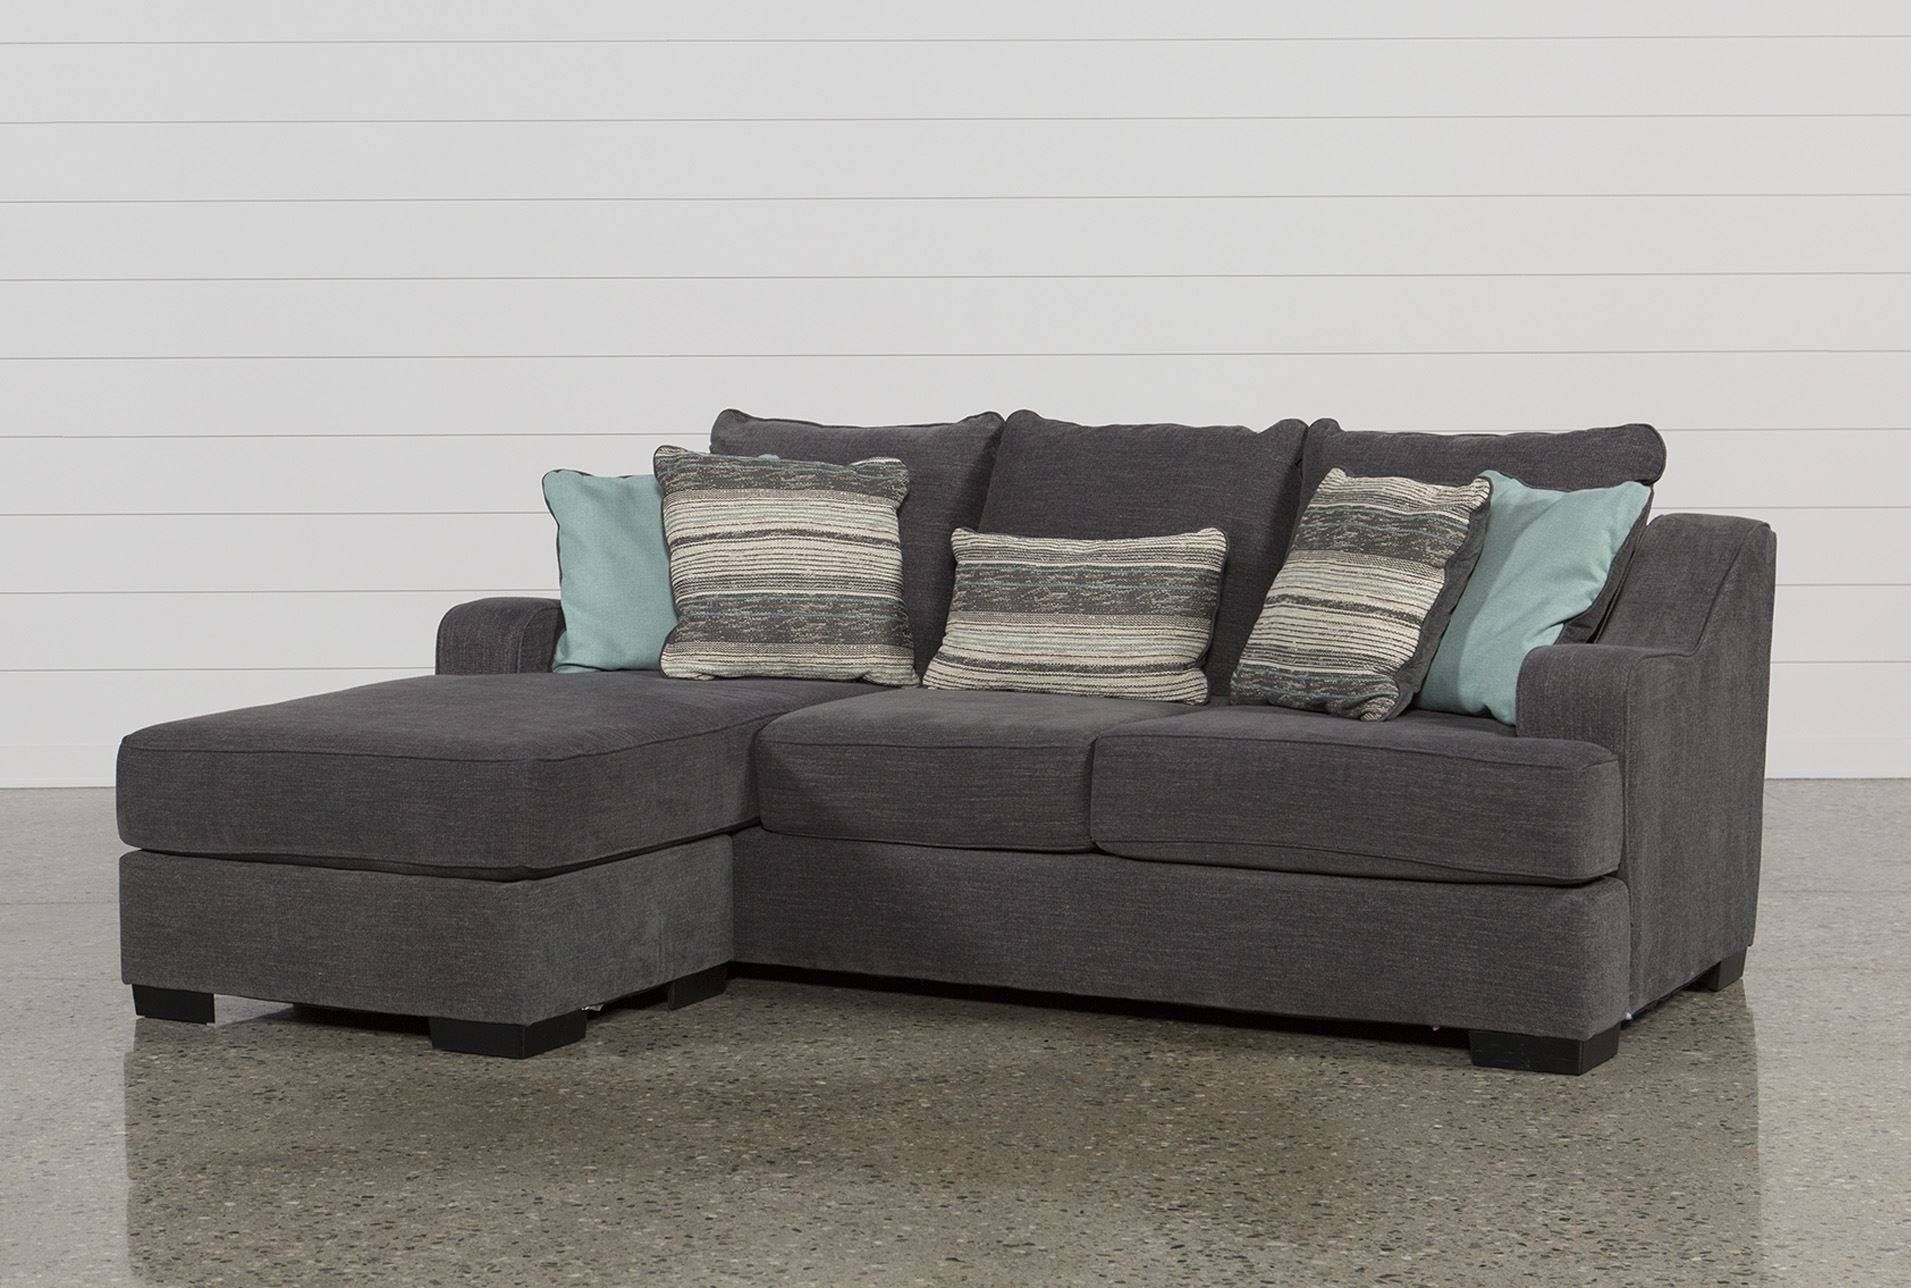 Furniture: Using Comfy Simmons Sleeper Sofa For Home Furniture In Simmons Chaise Sofa (View 14 of 25)